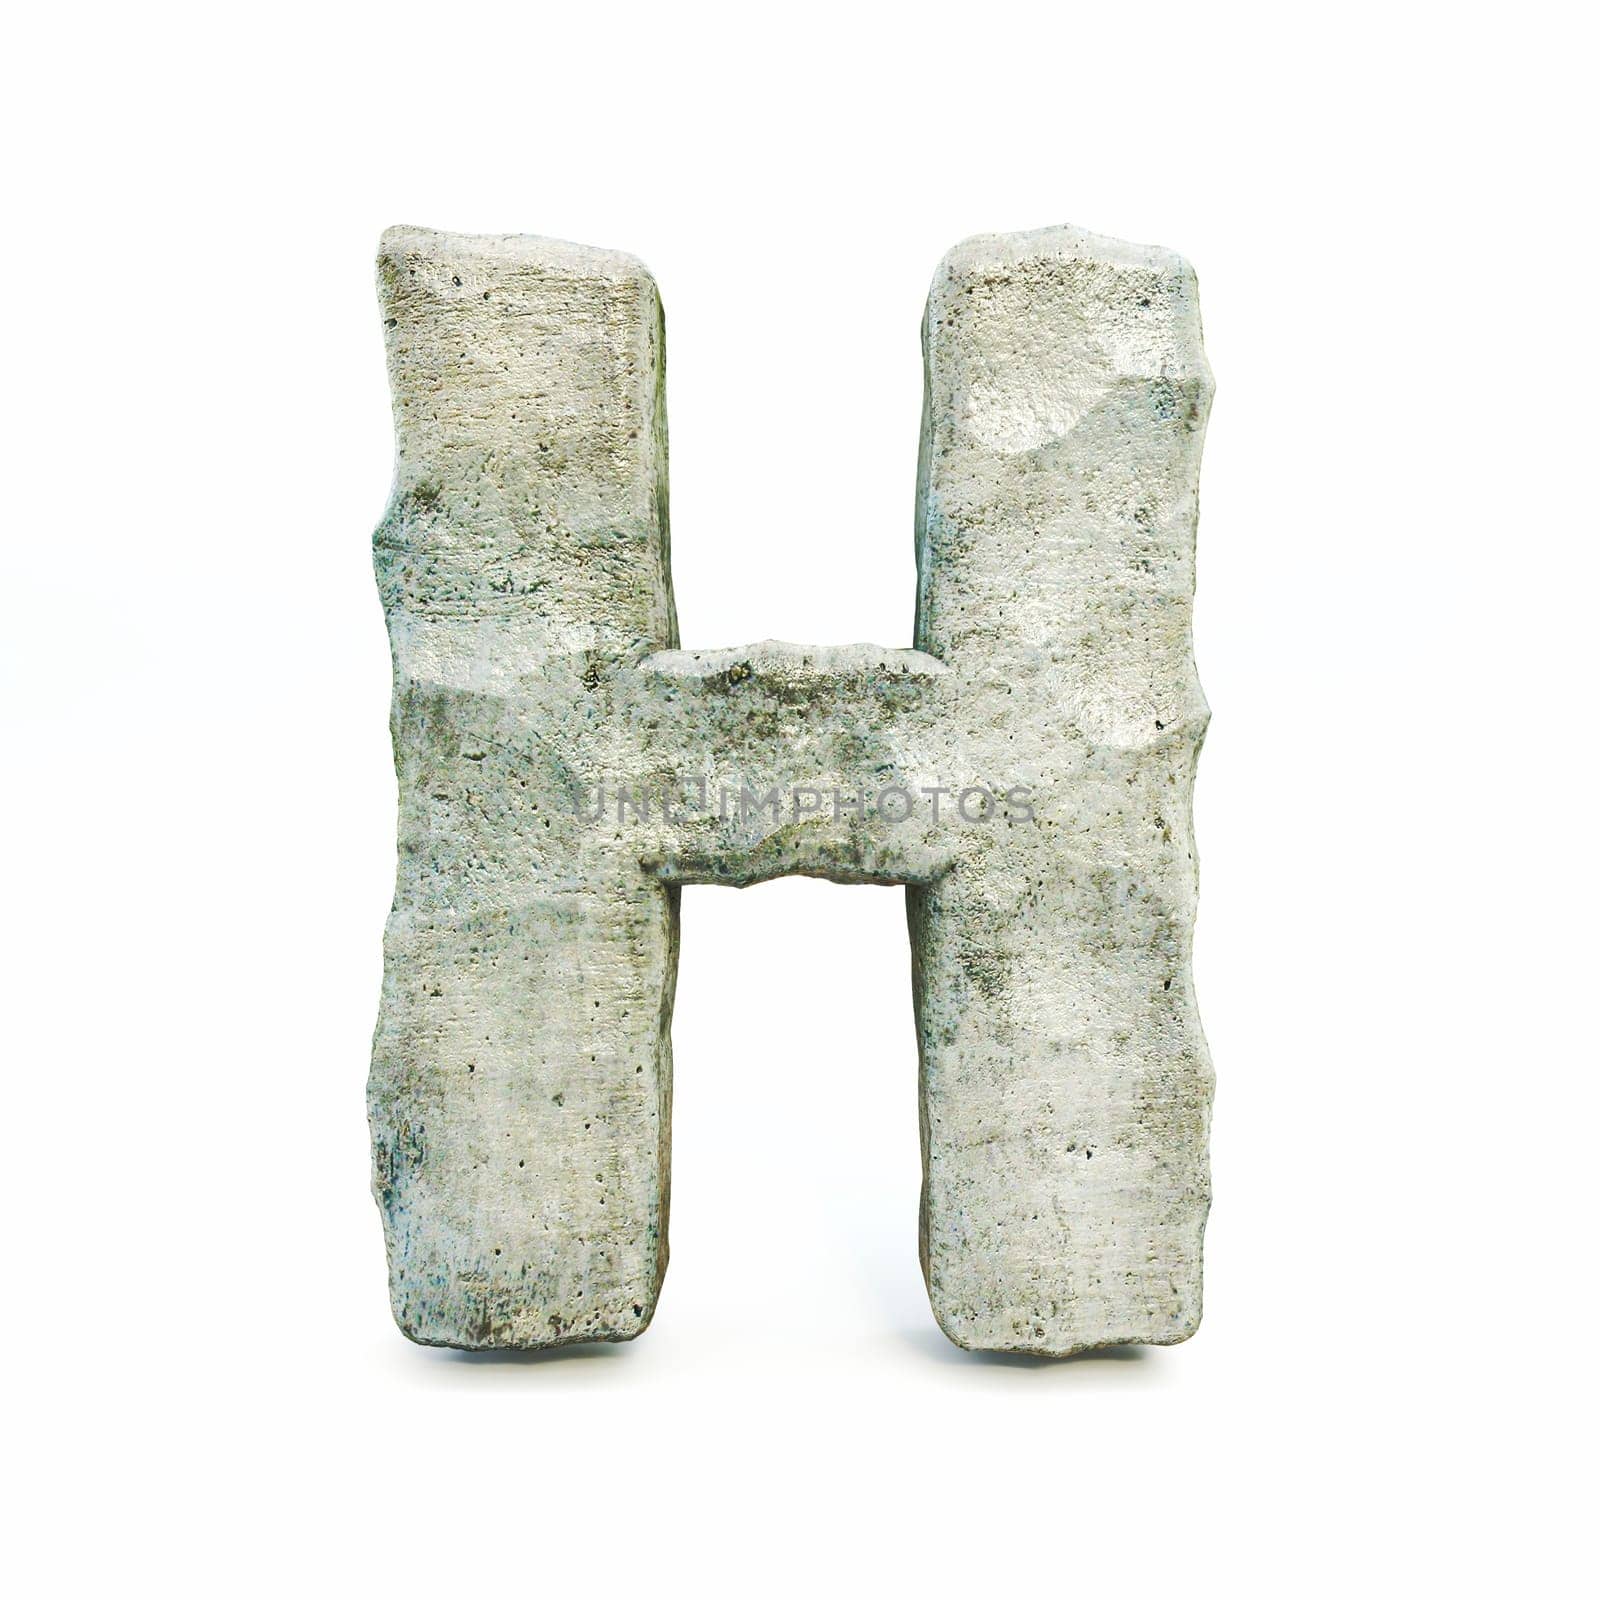 Stone font Letter H 3D by djmilic